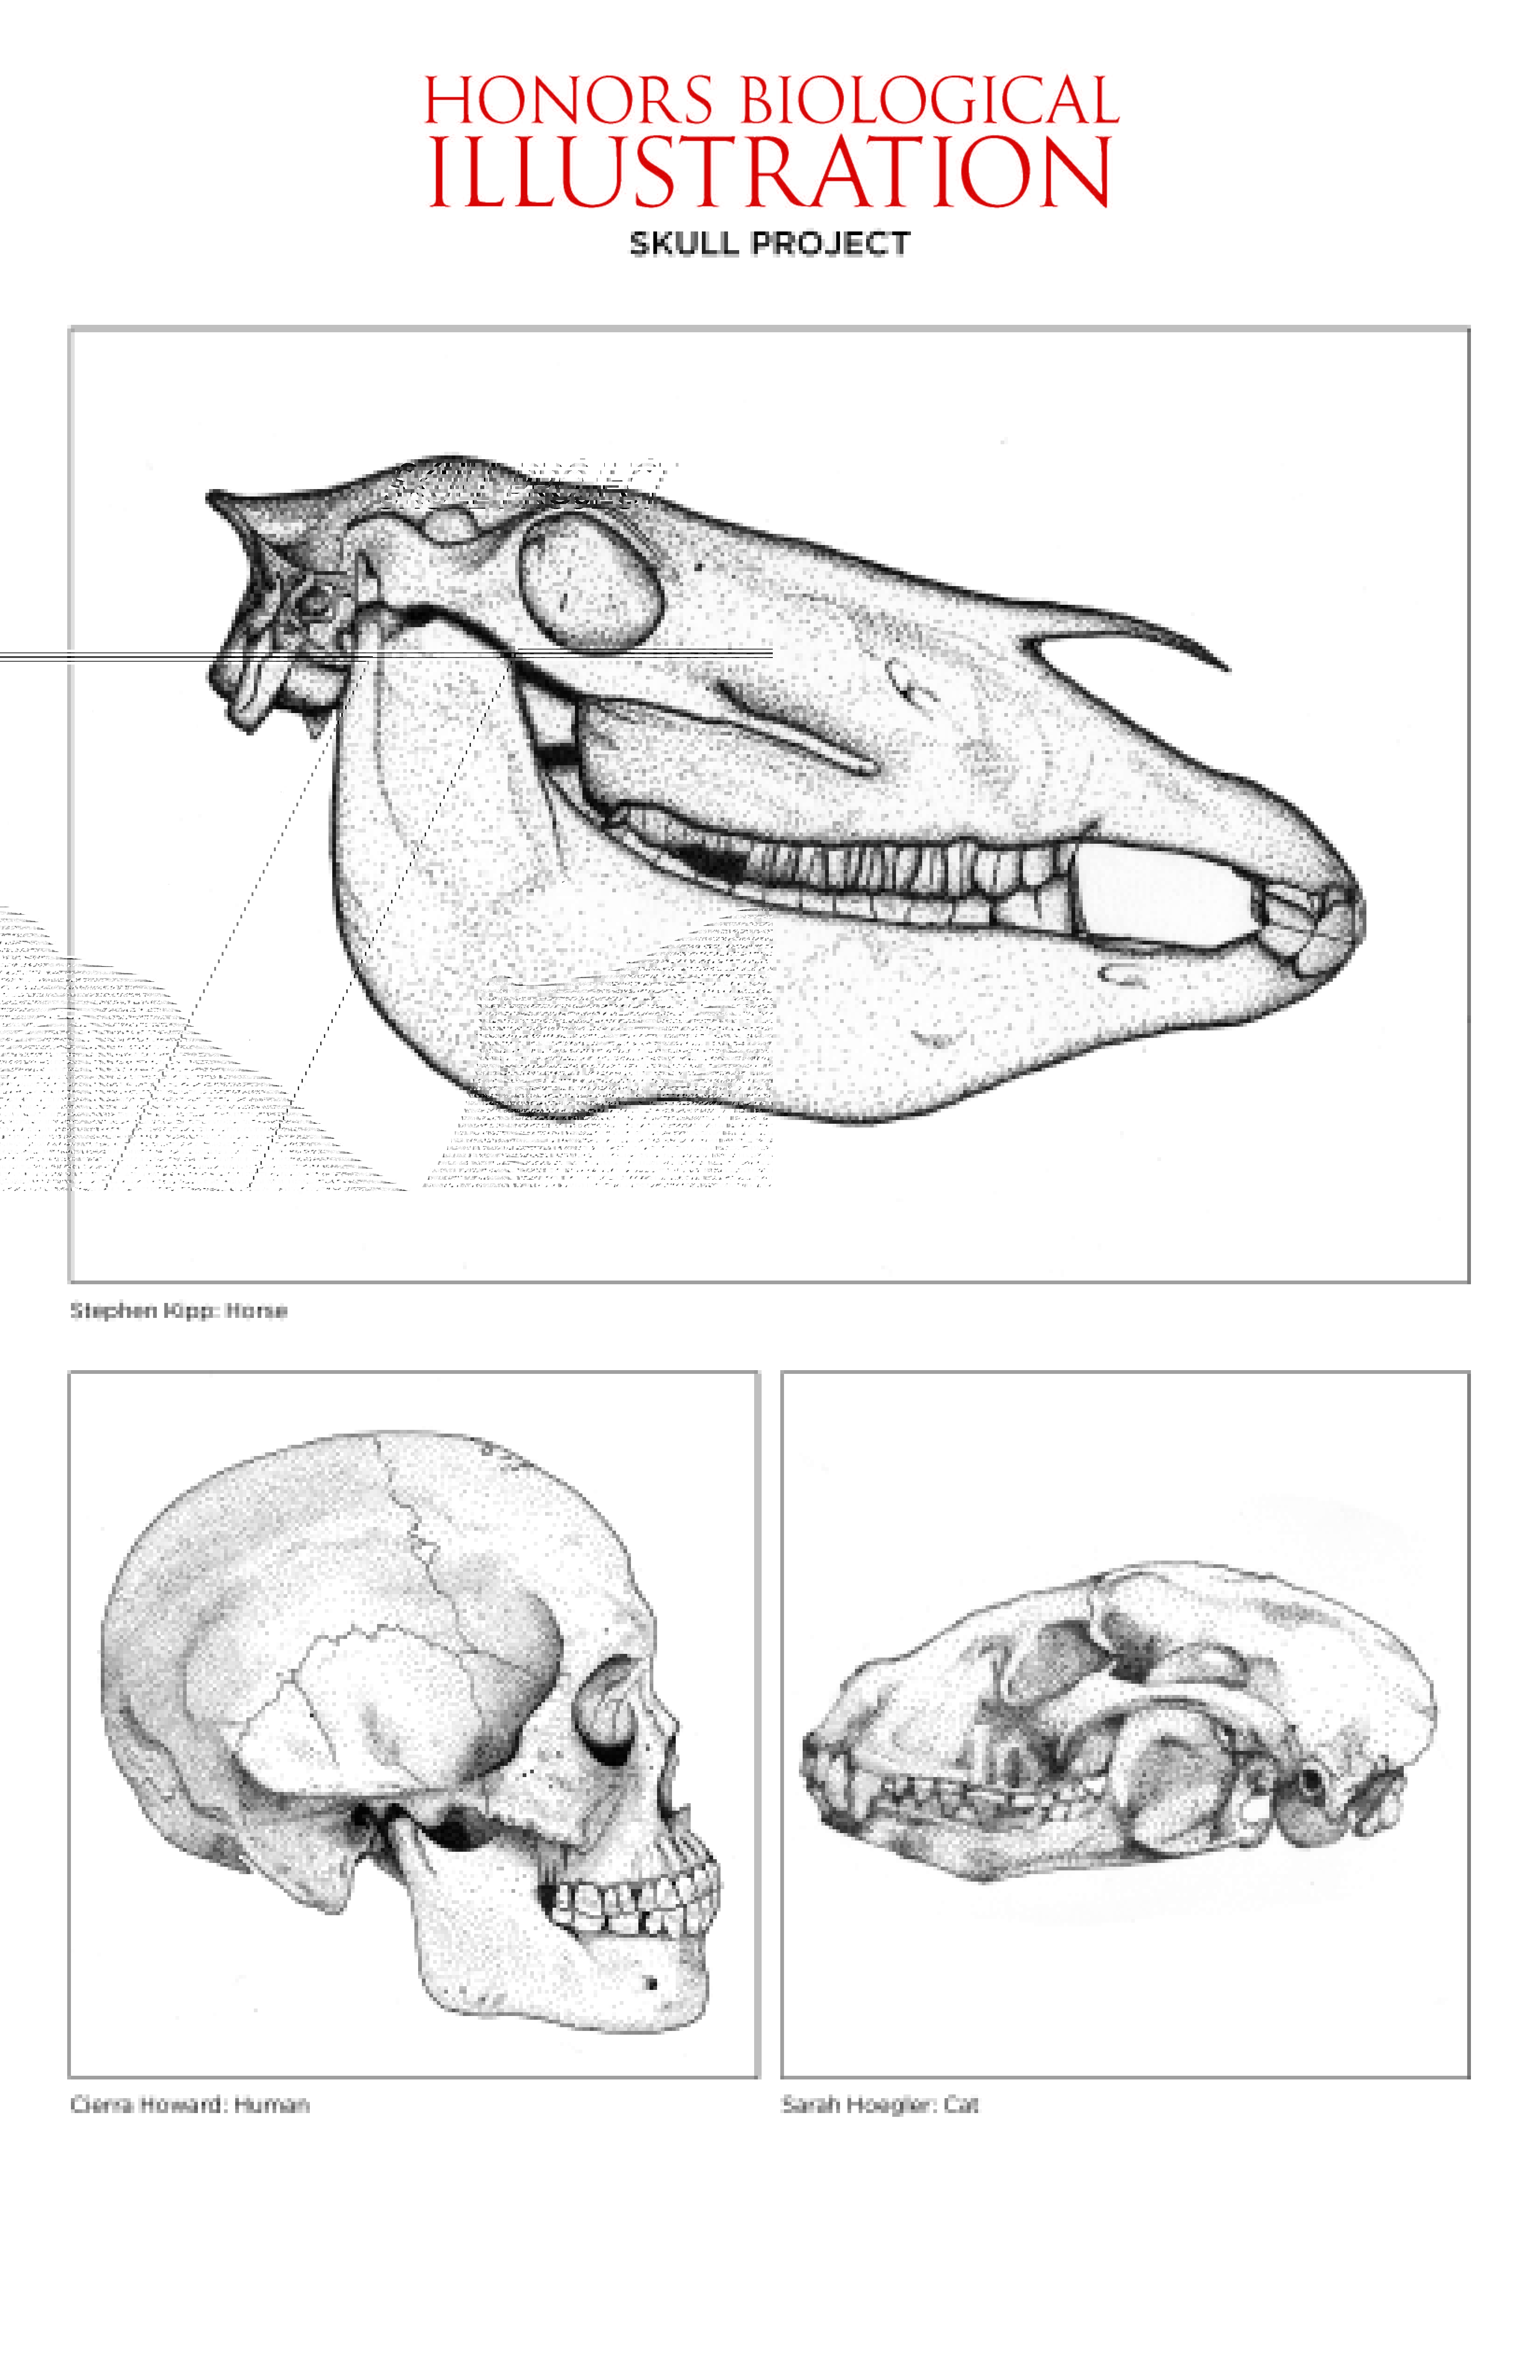 Drawings for Biological Illustration honors course. The top drawing is of a horse skull, which faces the right. A human skull is on the bottom left, facing right. A cat skull is on the bottom right, facing left.